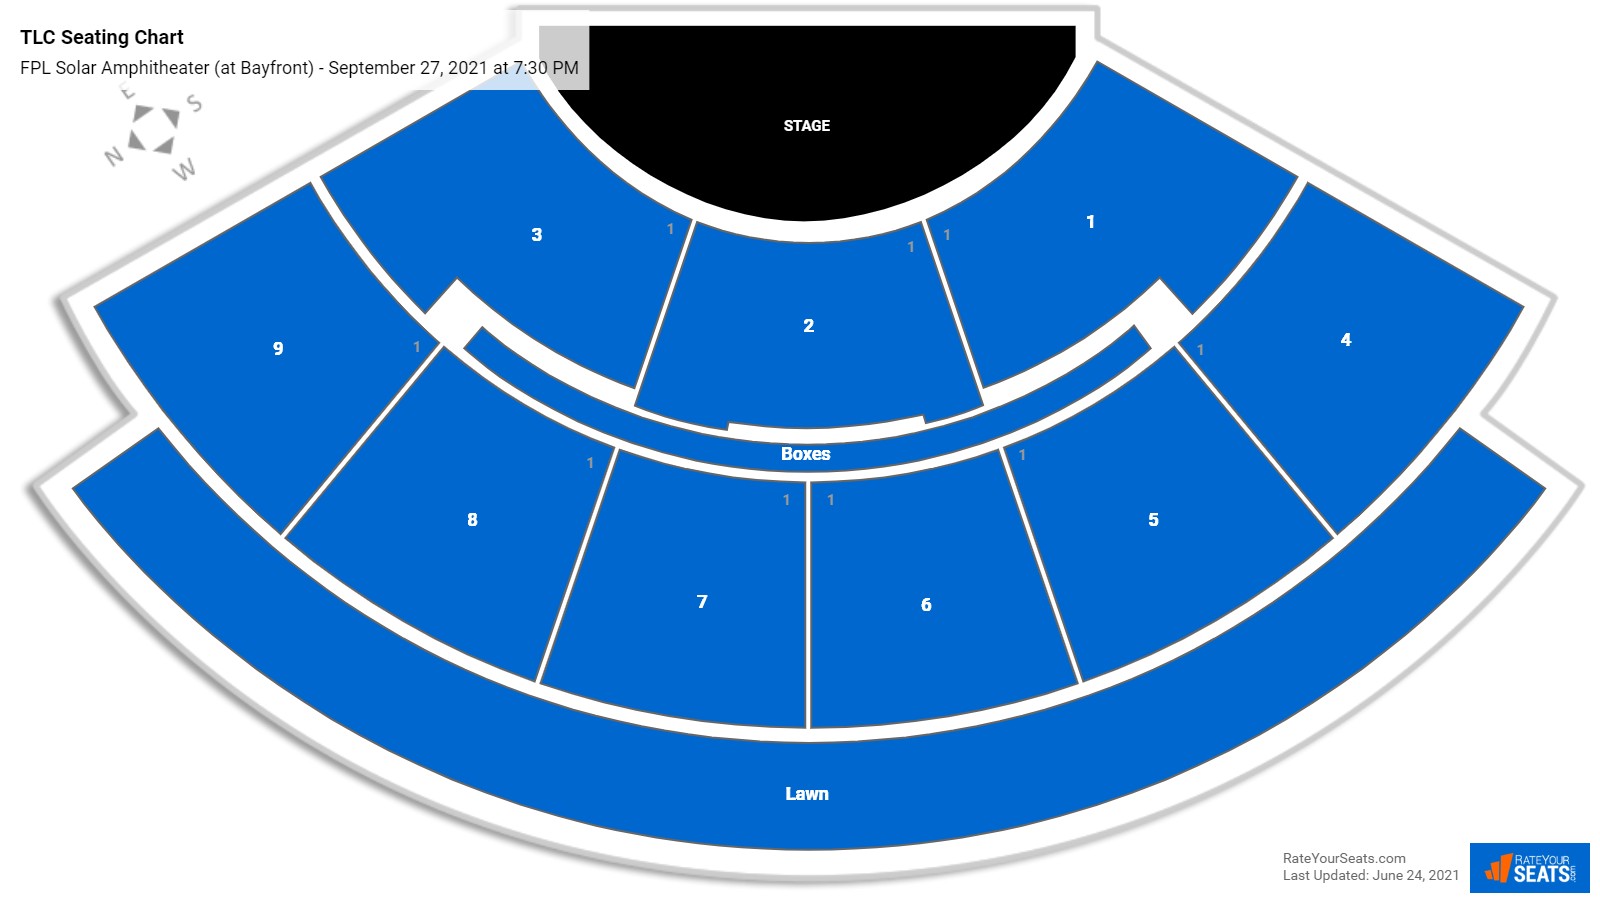 FPL Solar Amphitheater Seating Chart